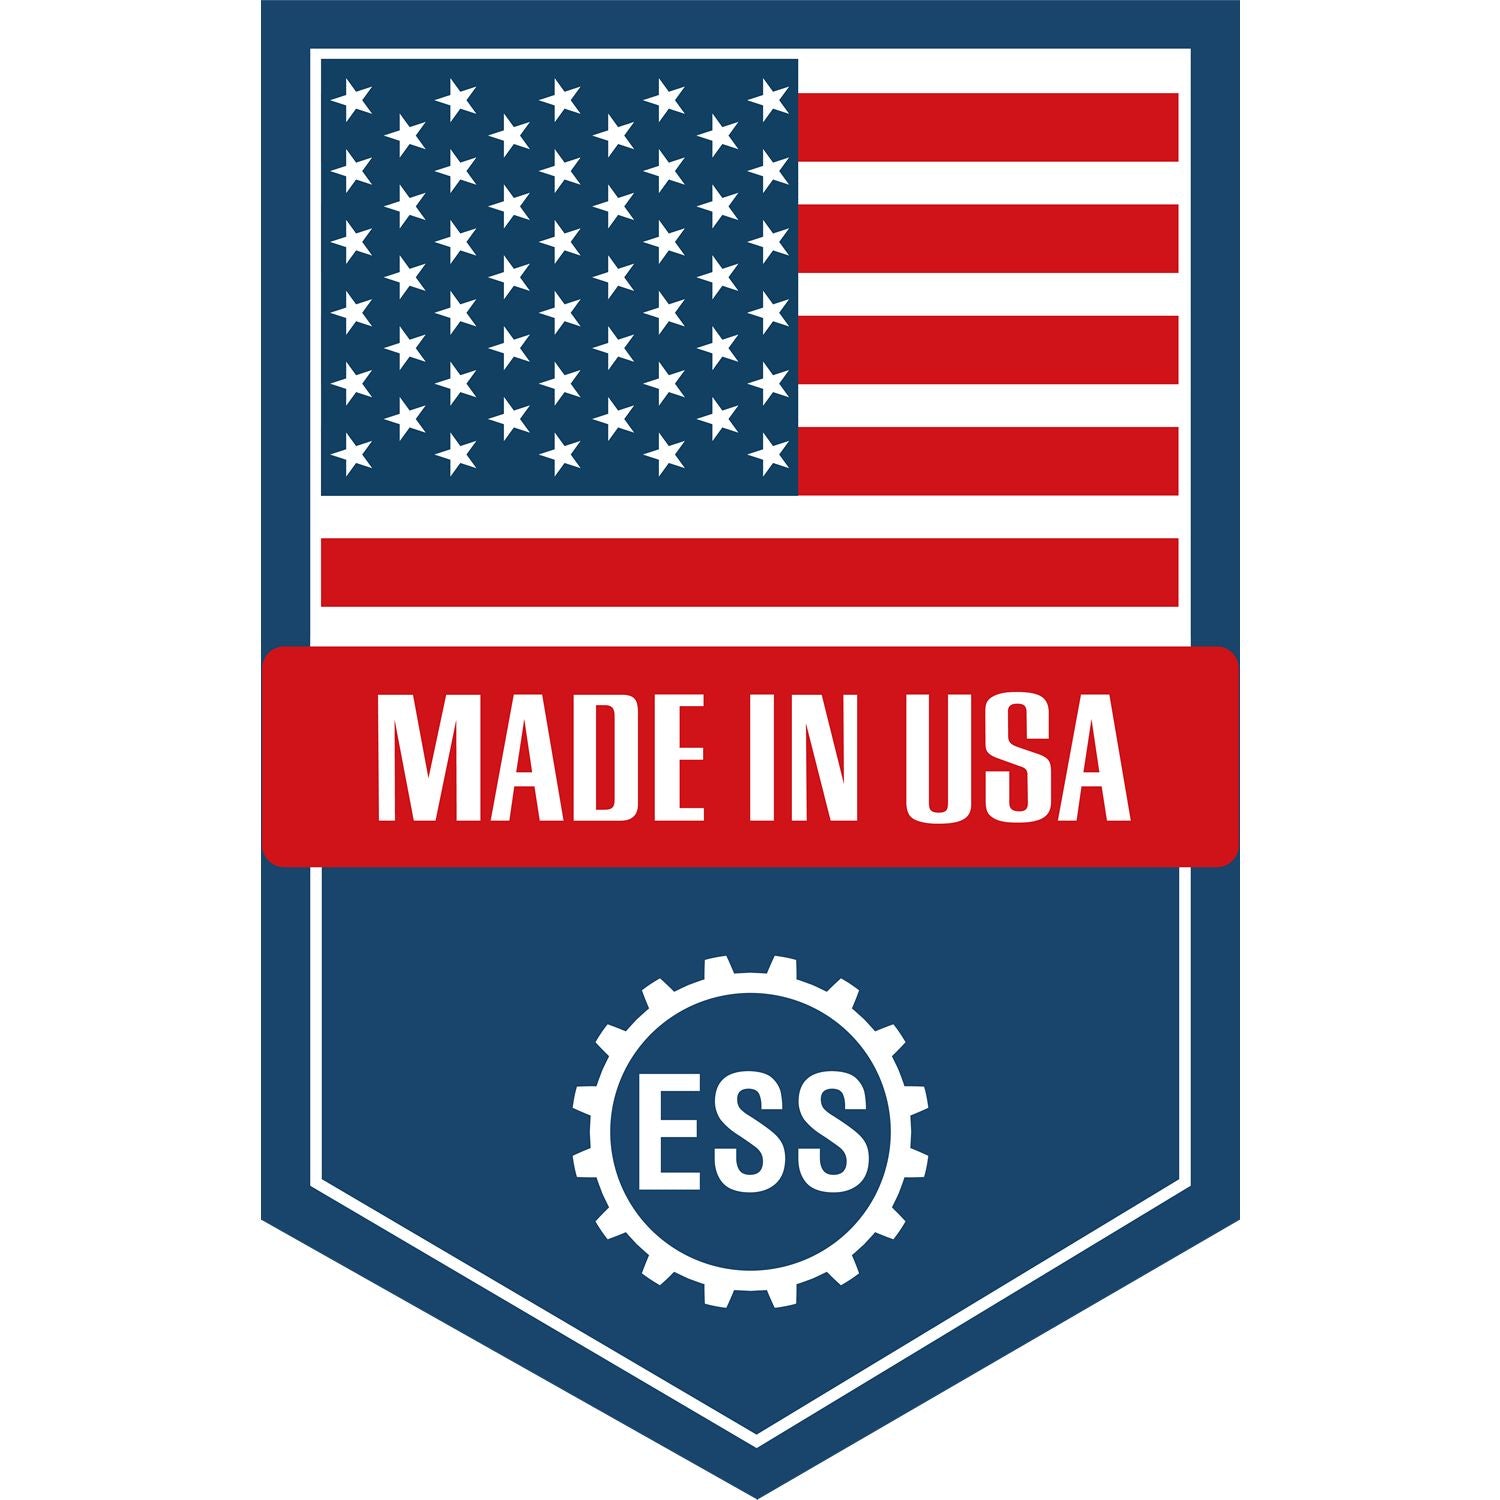 An icon or graphic with an american flag and text reading Made in USA for the South Dakota Professional Engineer Seal Stamp